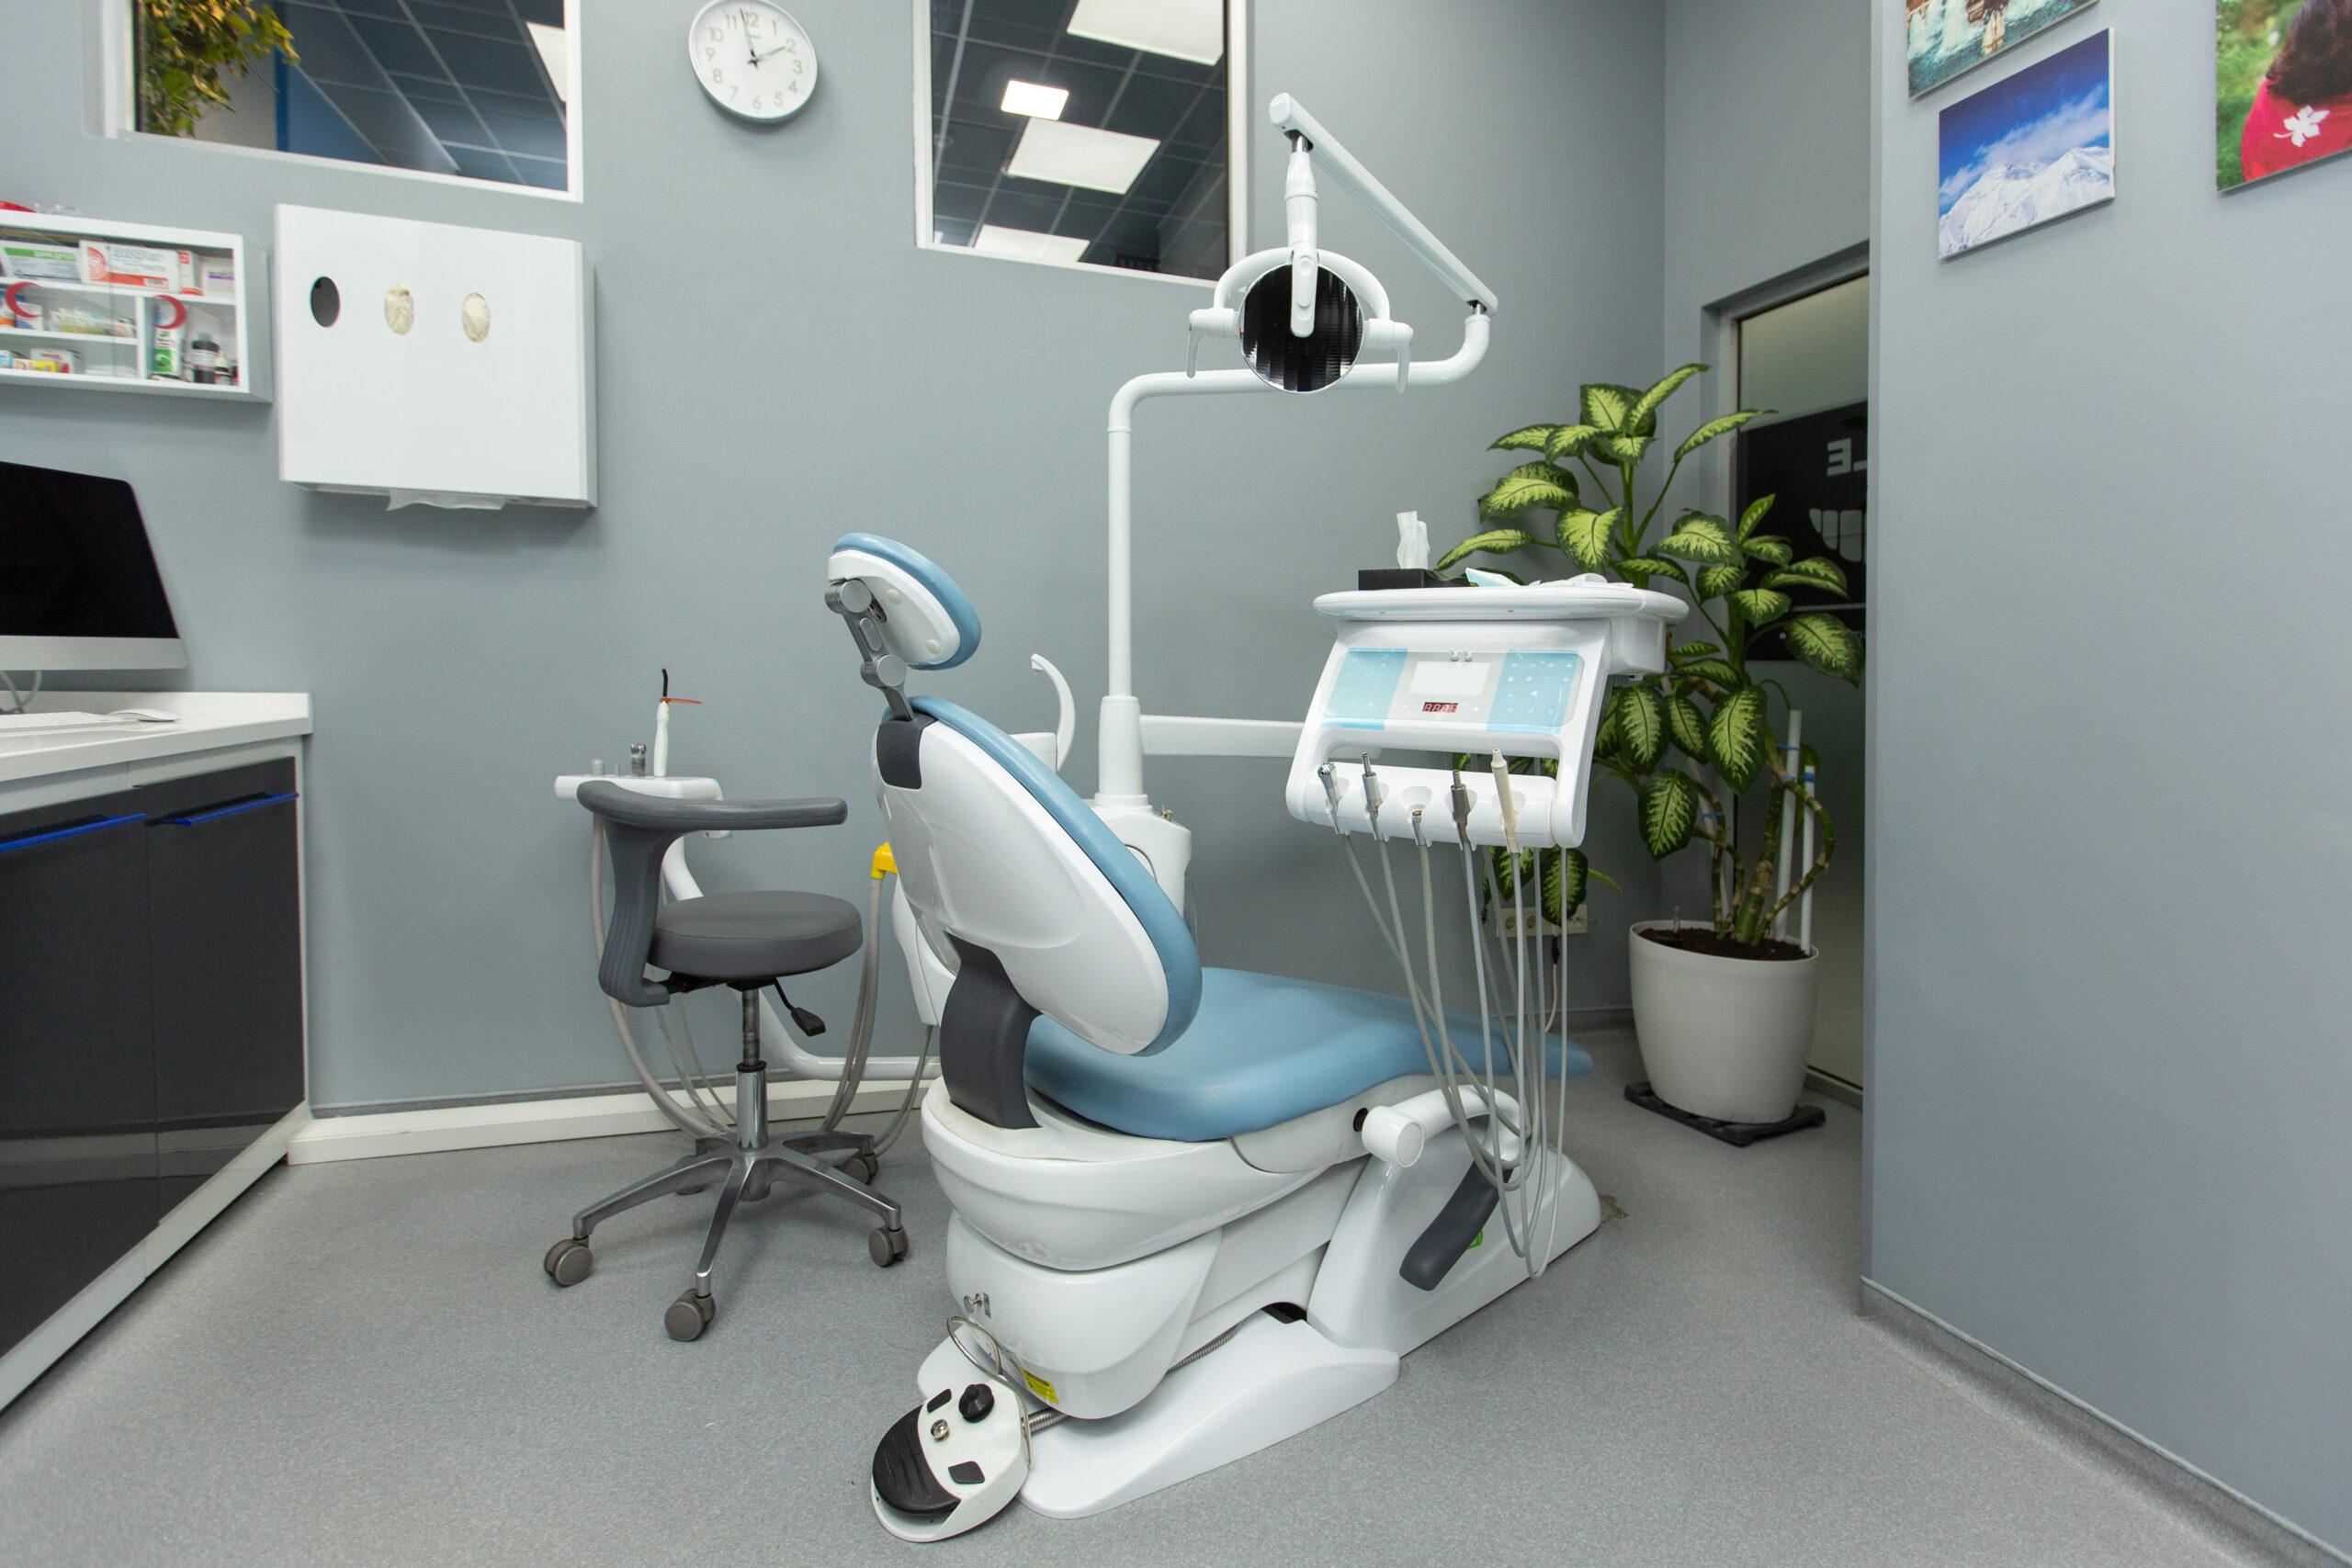 Comfort and Care The Benefits of Medical Recliner Chairs in Medical Settings